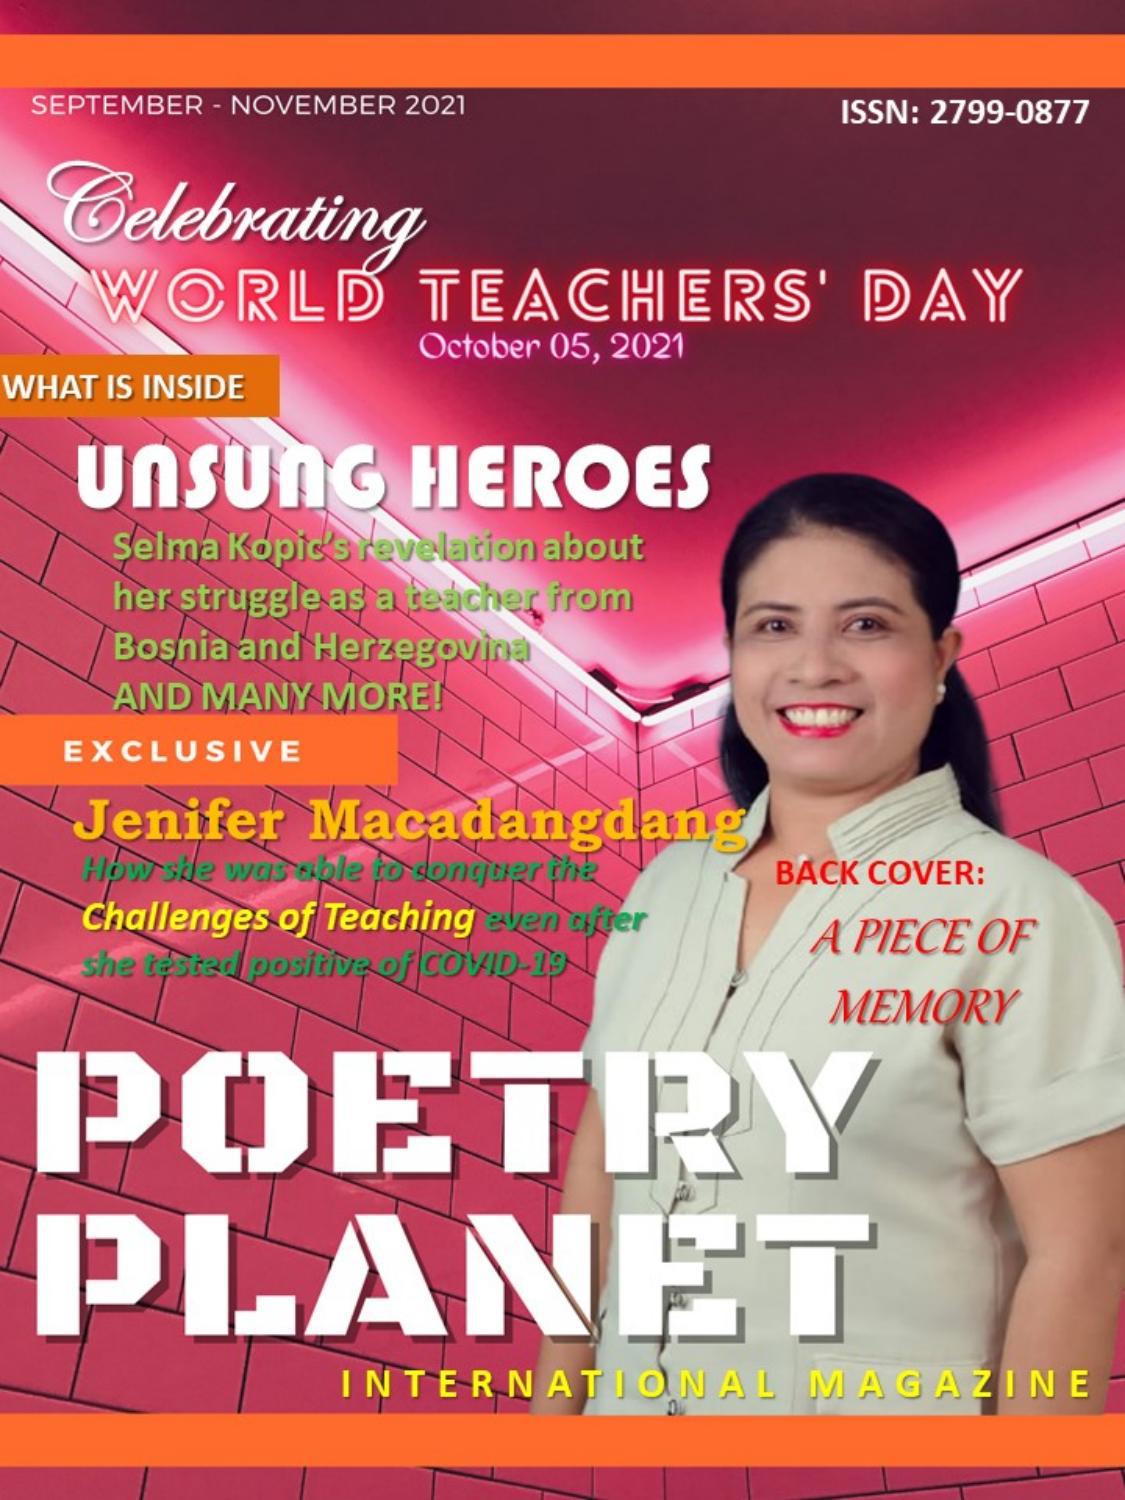 THE UNSUNG HEROES (Poetry Planet International magazine 2nd issue)